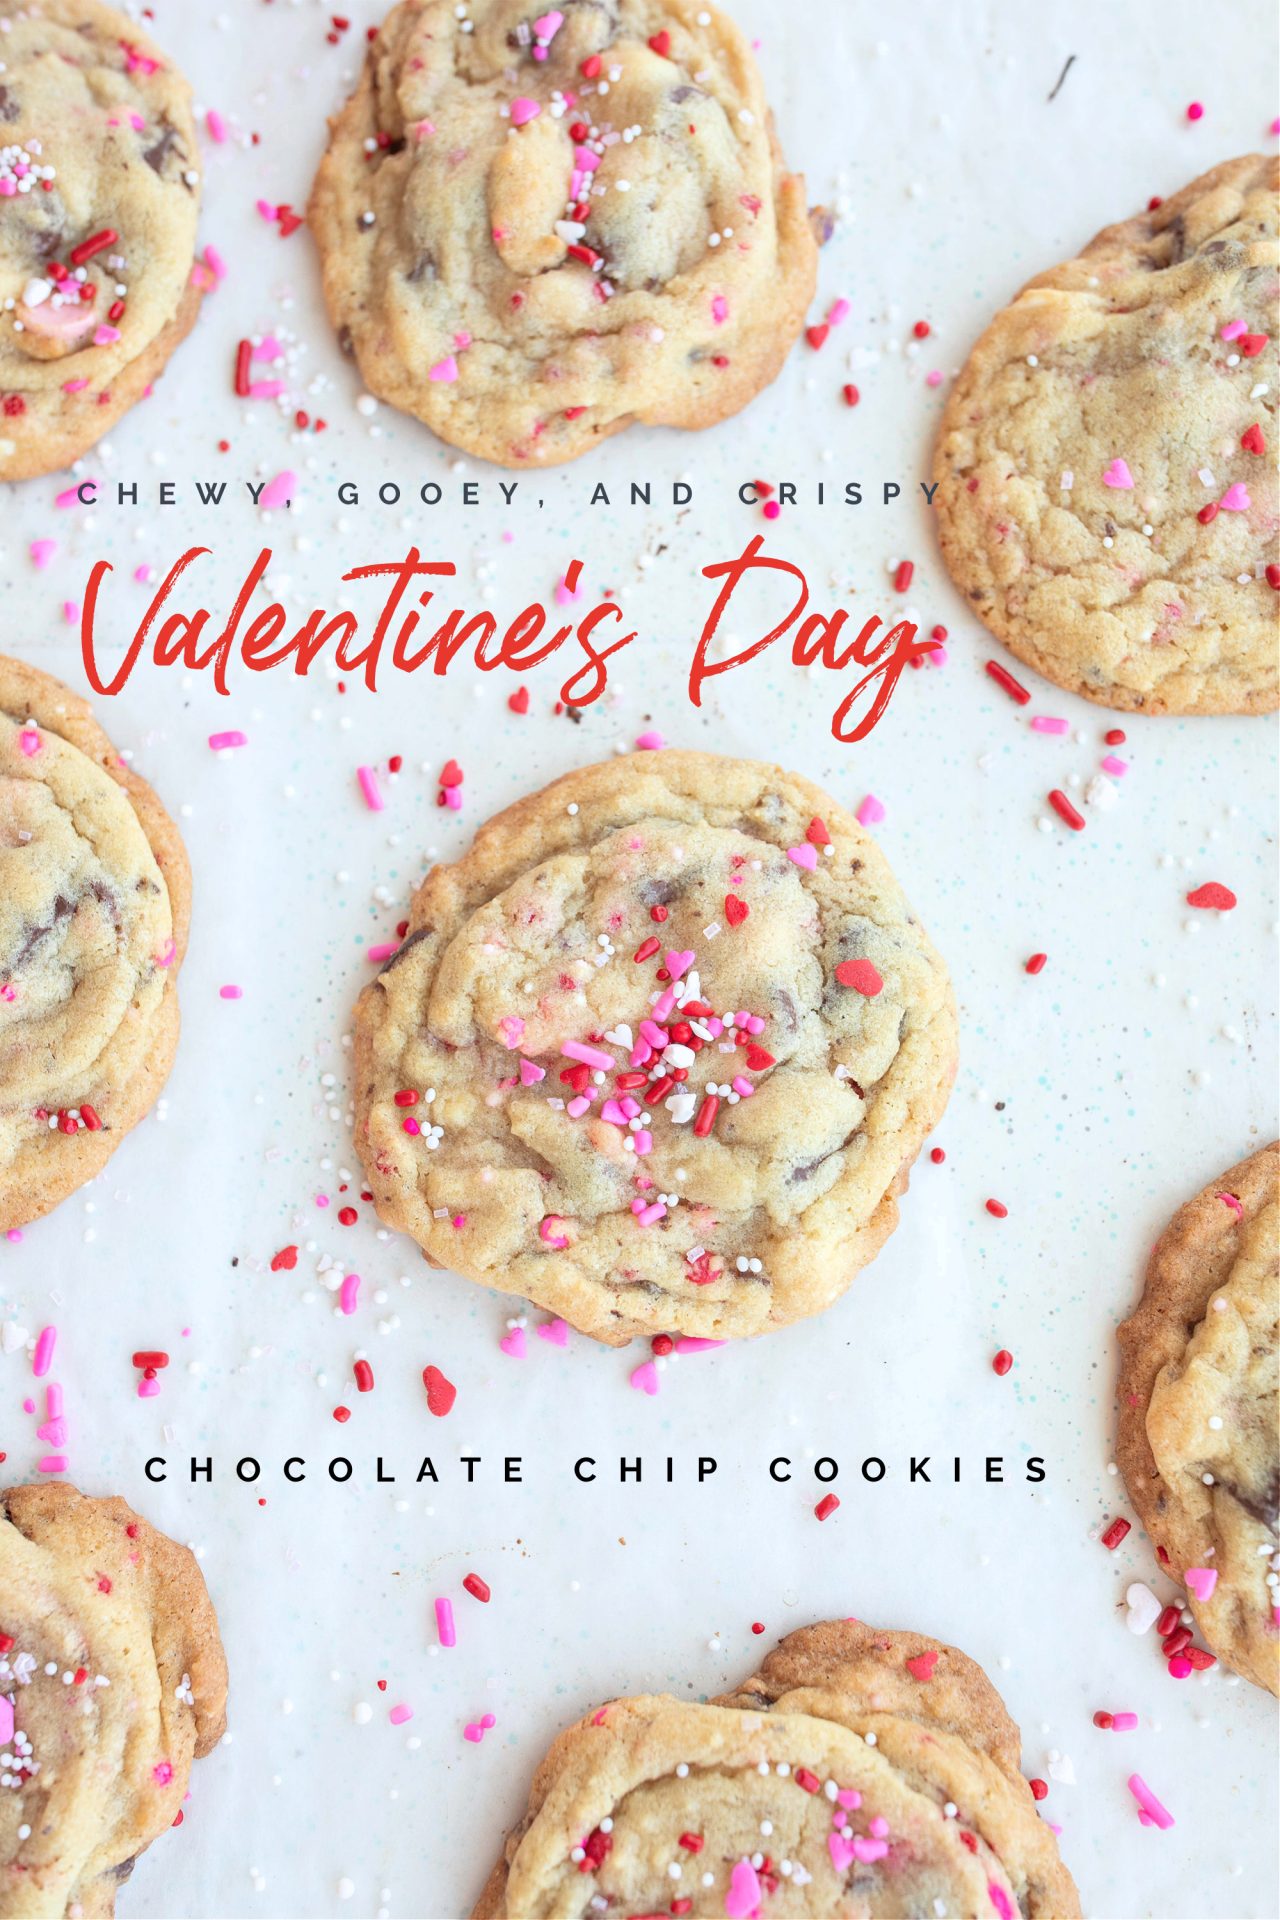 - Valentine's Day - Chocolate Chip Cookies - Sweet Treats - Baked Goods - Love - Romance - Heart Shaped - Red and Pink - Decorated - Sugar Cookies - Chocolate Covered